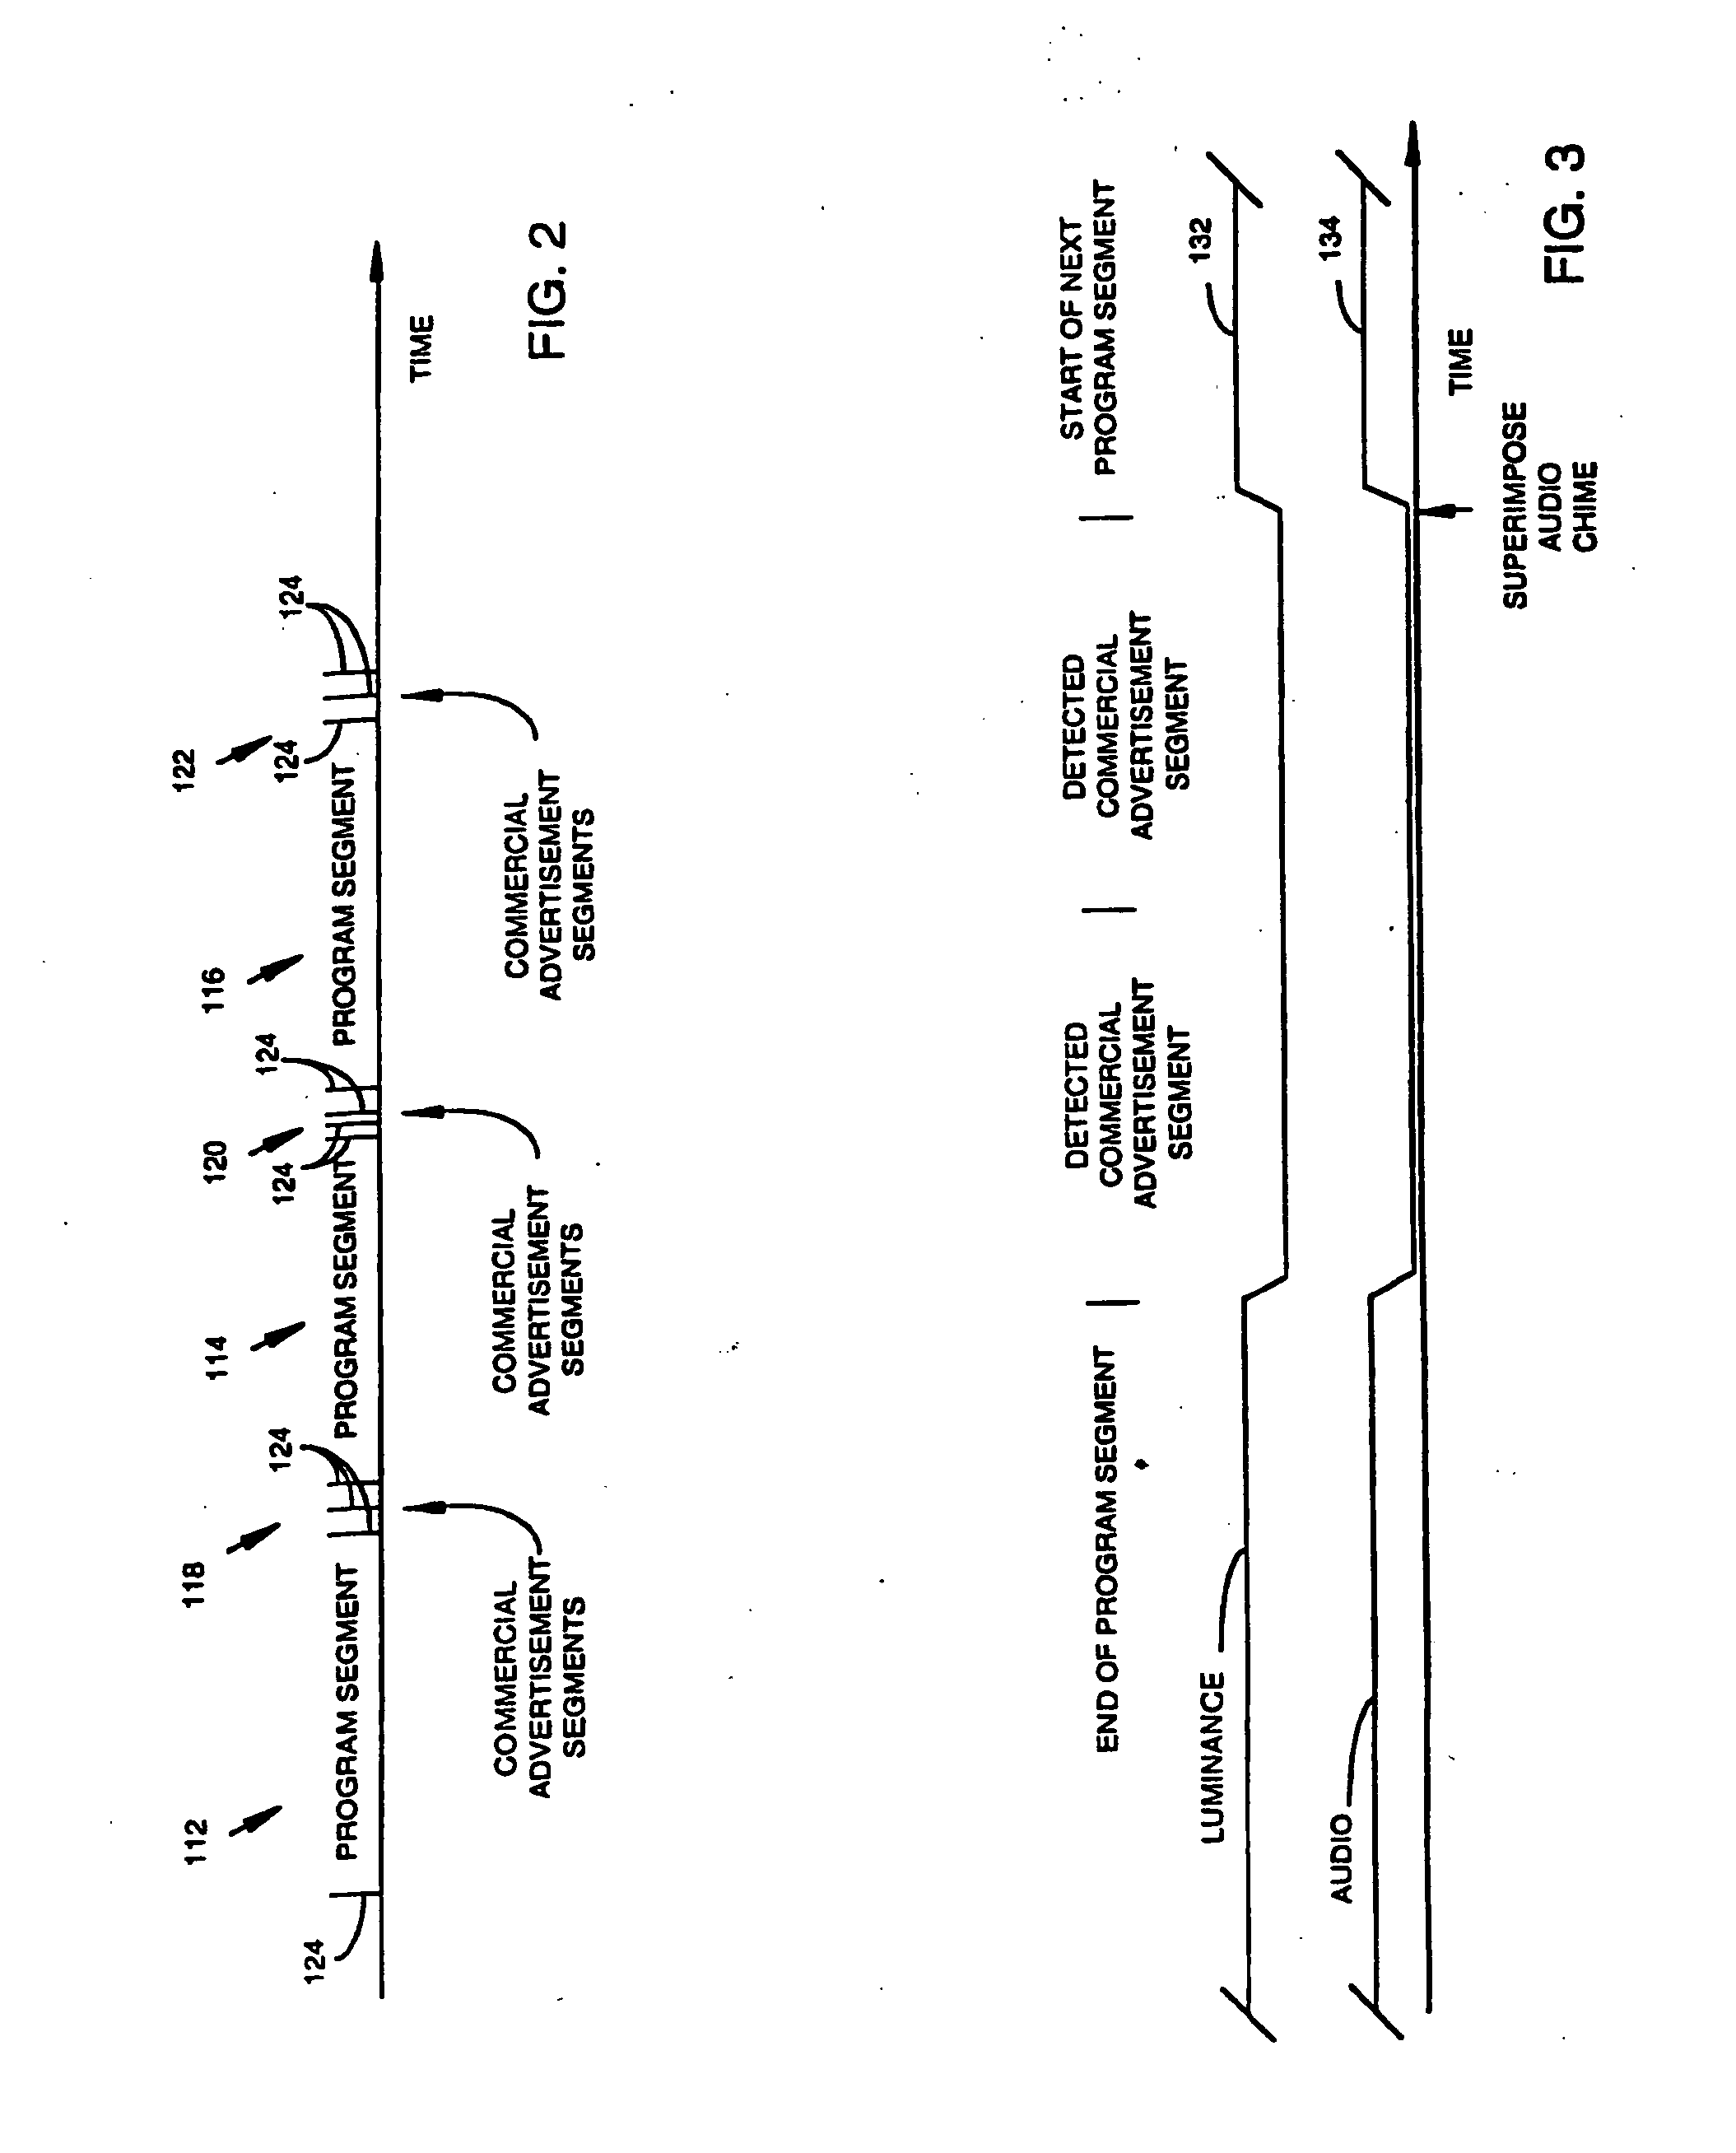 Method and apparatus for selectively altering a televised video signal in real-time